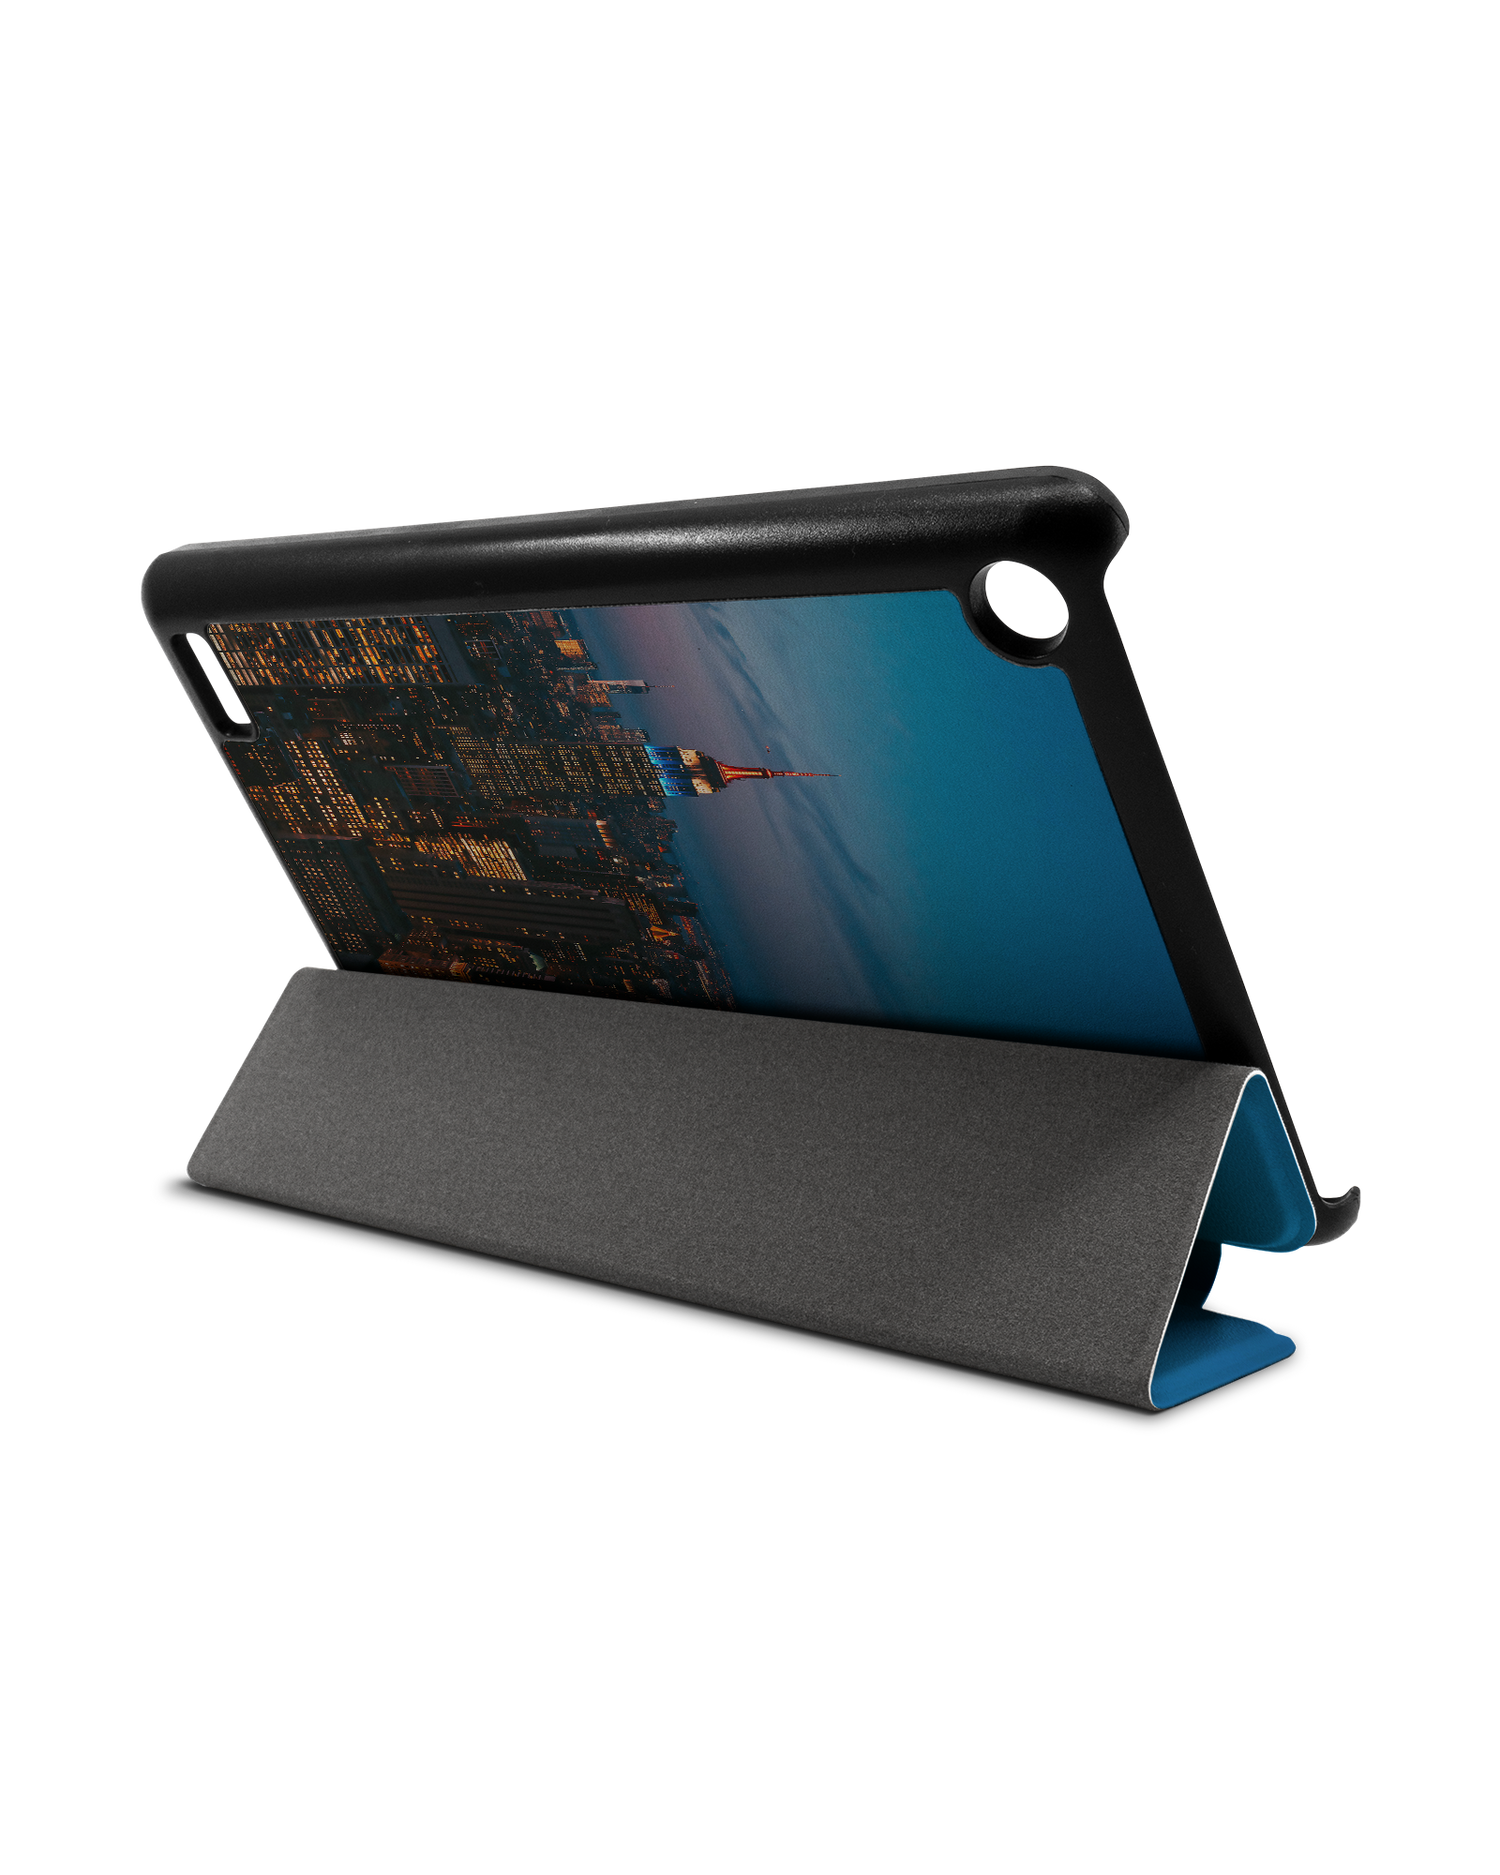 New York At Dusk Tablet Smart Case for Amazon Fire 7: Used as Stand